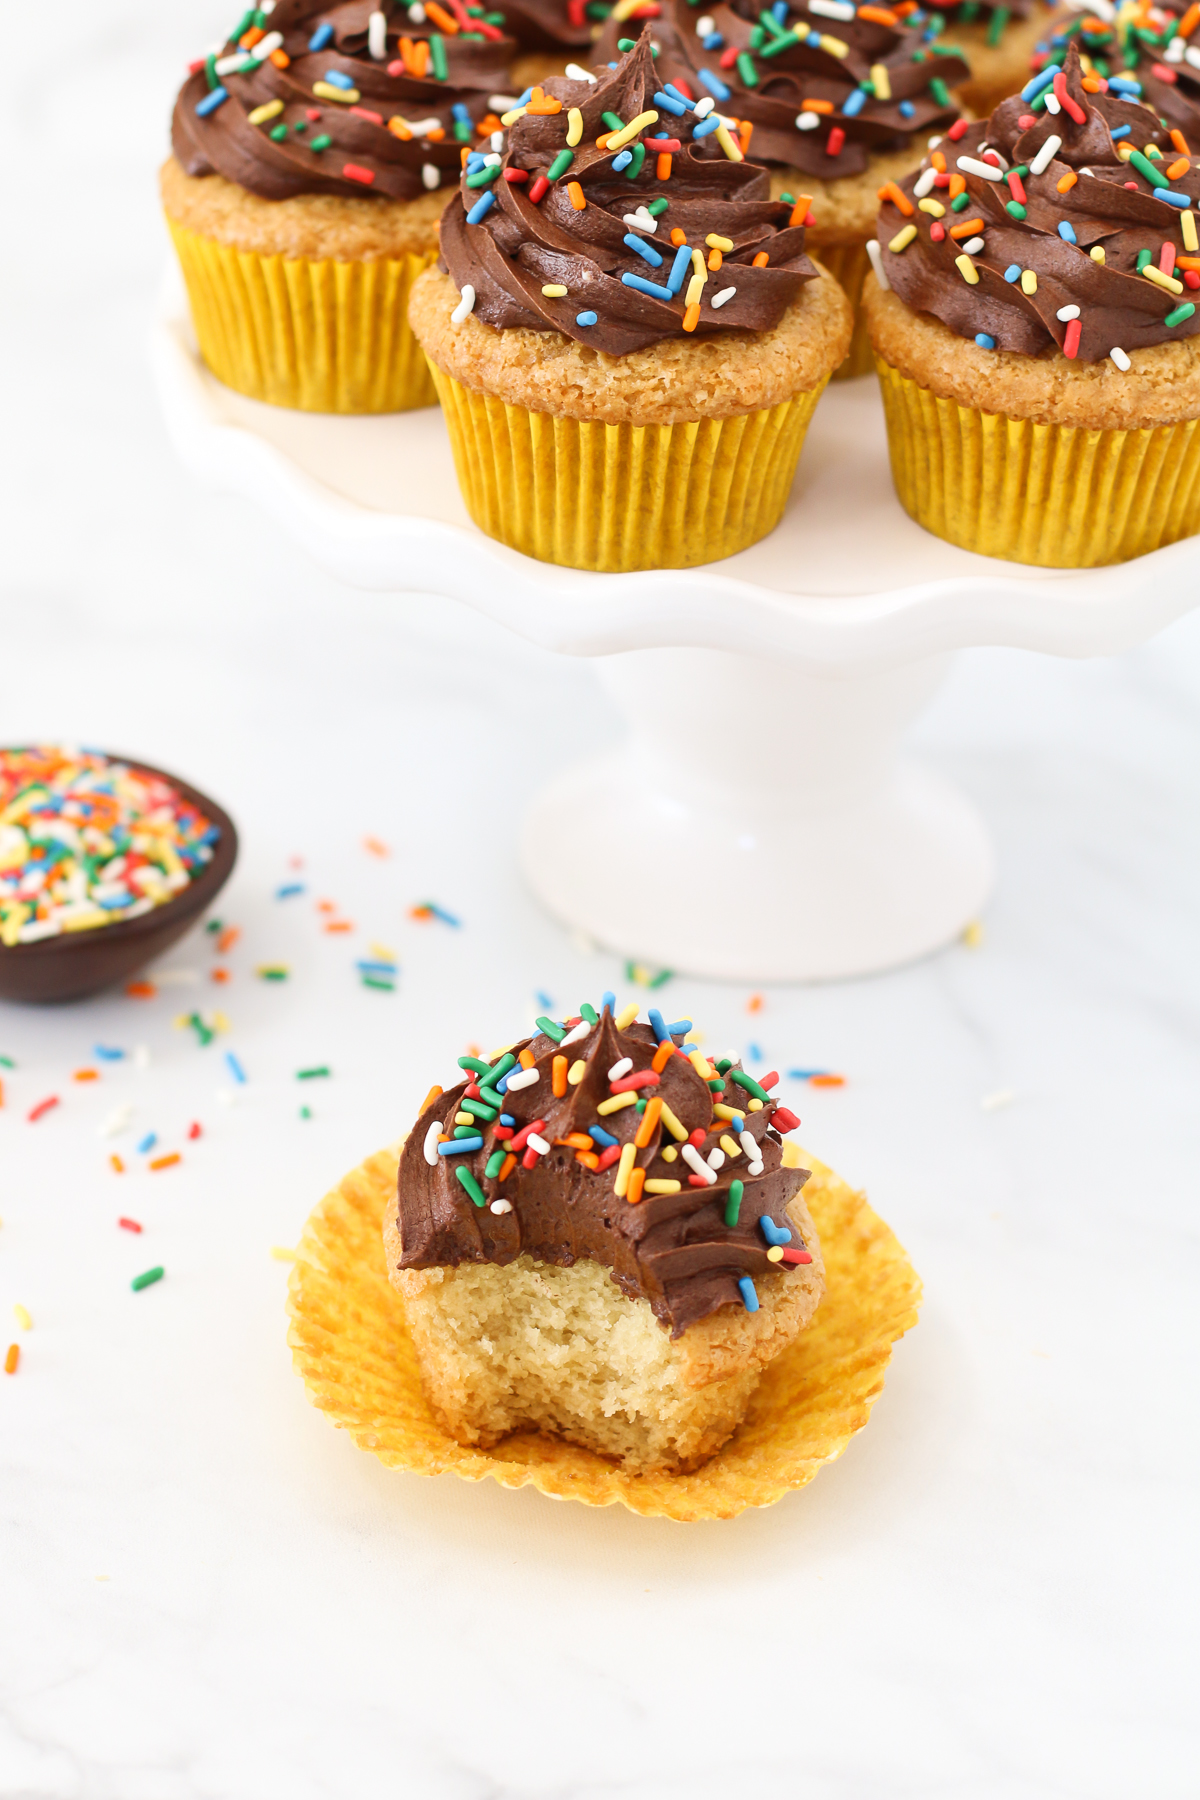 Gluten Free Vegan Vanilla Cupcakes with Chocolate Frosting. The classic chocolate-vanilla combo is sure to make your cupcake dreams come true! 